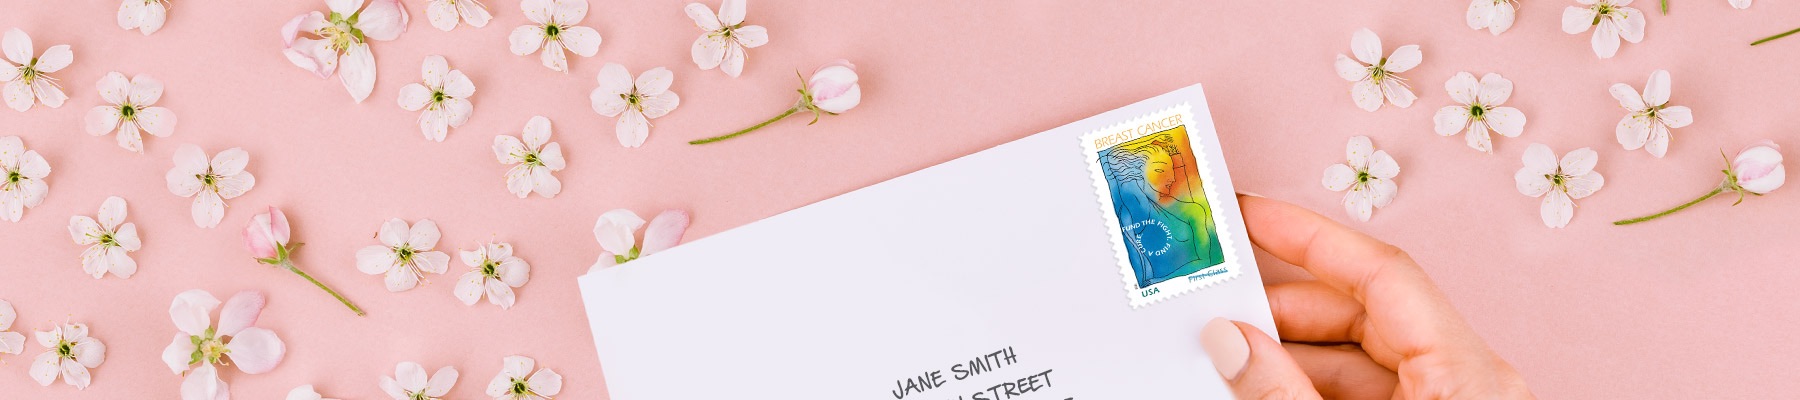 Breast Cancer Research semipostal stamp on a white envelope.